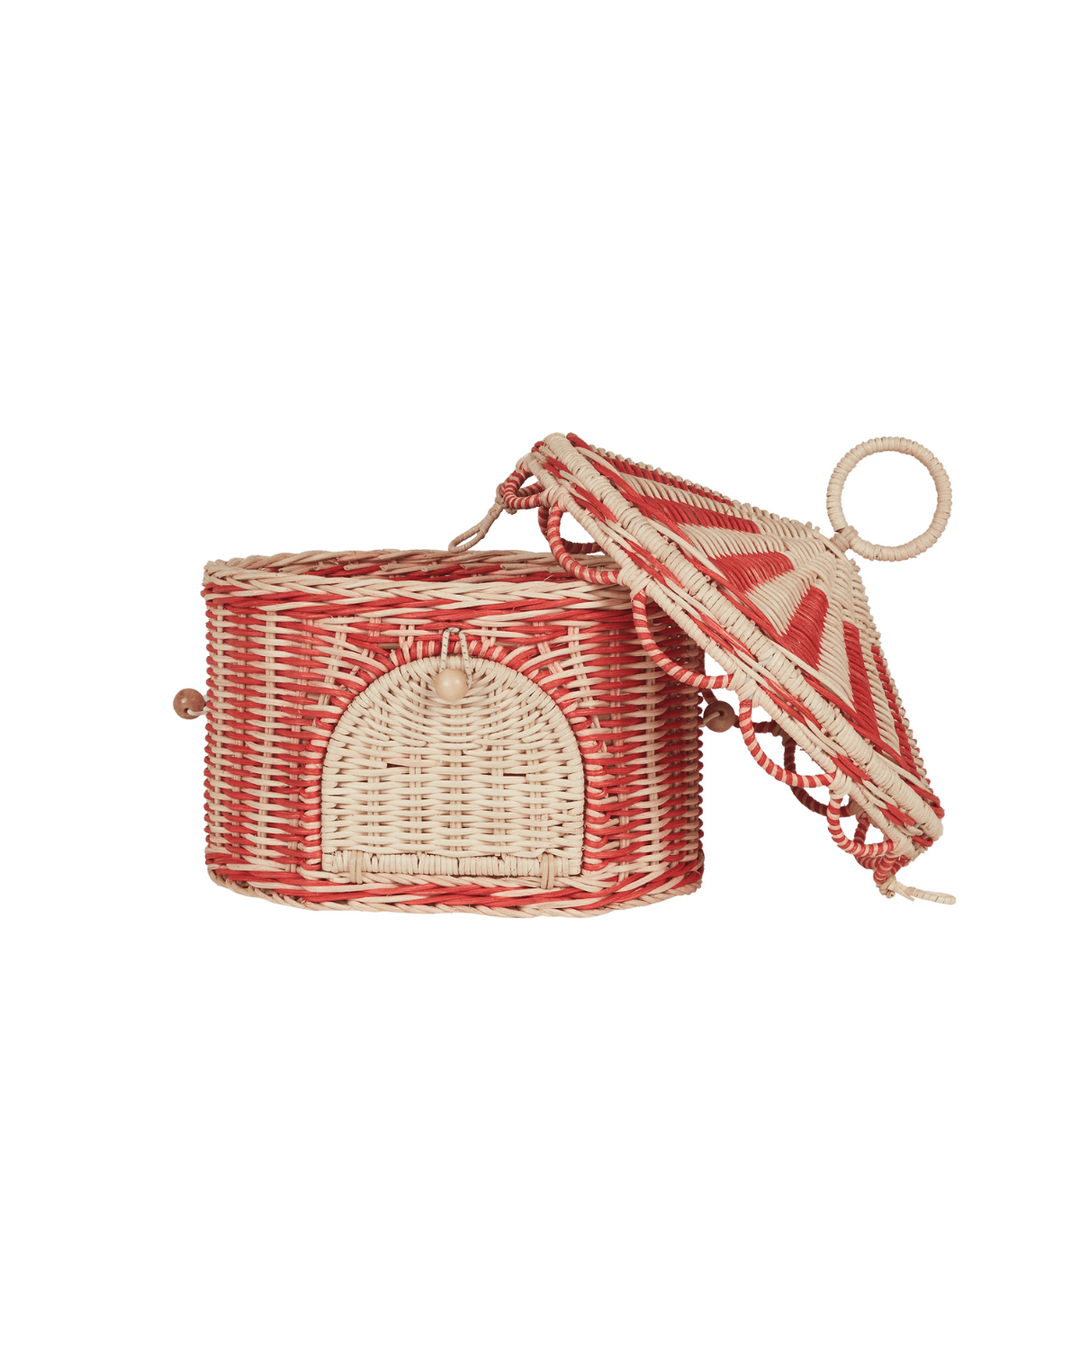 Red and Straw Basket for Home Decor - Handmade Circus Tent